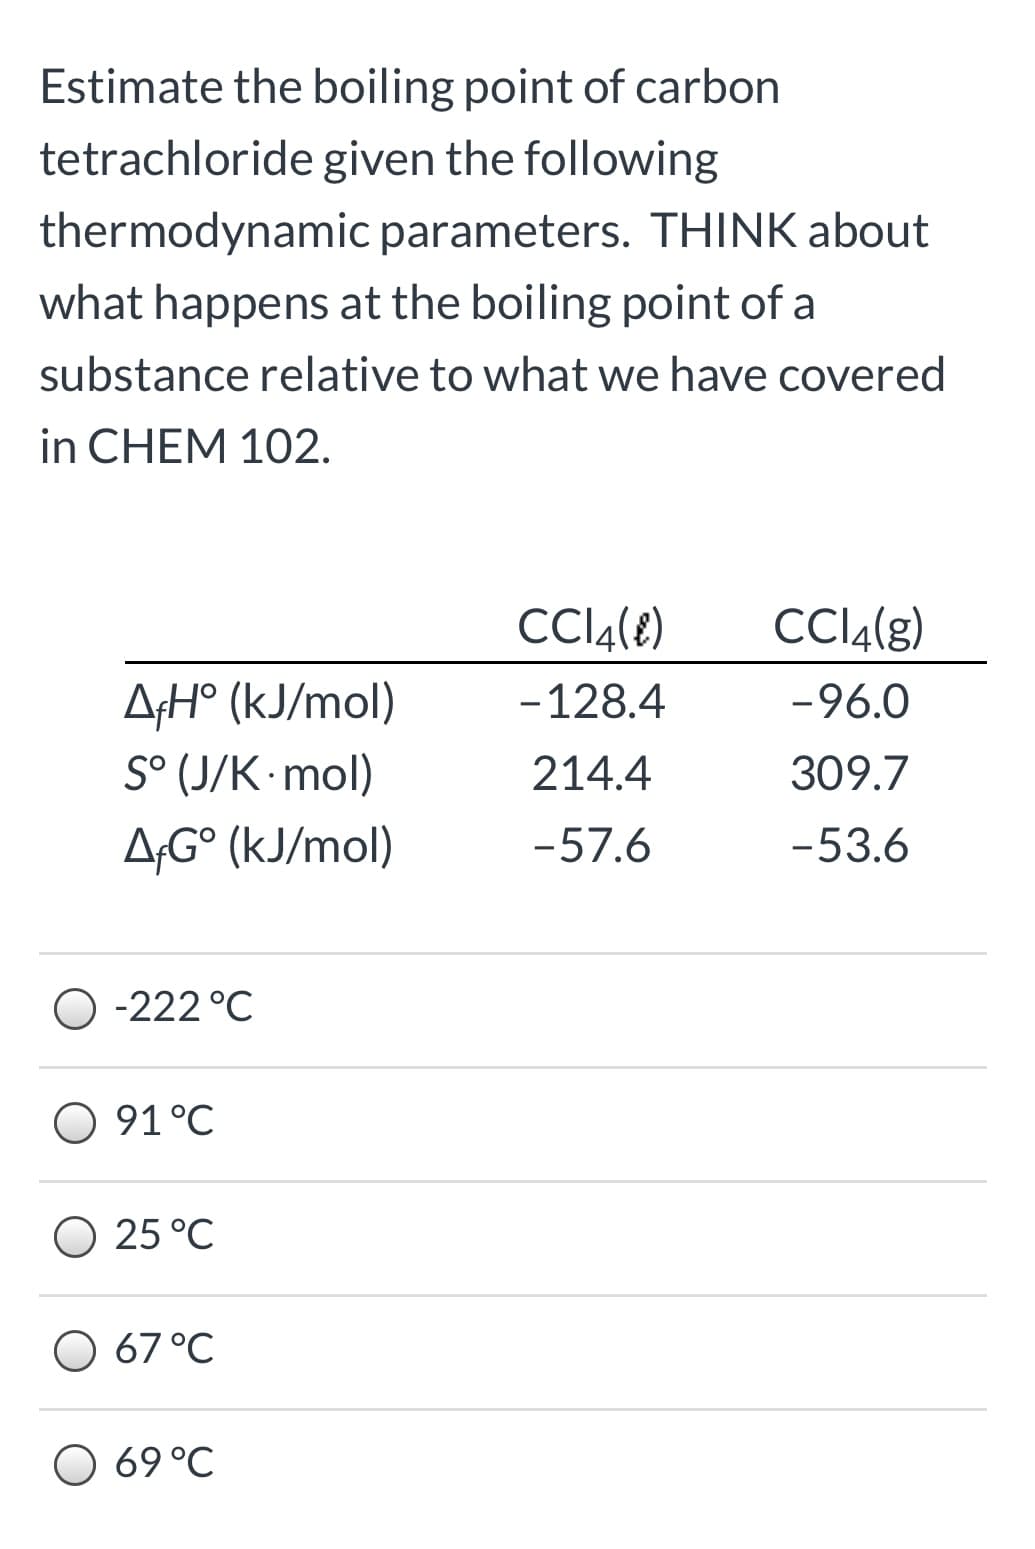 Estimate the boiling point of carbon
tetrachloride given the following
thermodynamic parameters. THINK about
what happens at the boiling point of a
substance relative to what we have covered
in CHEM 102.
CCI4(8)
CCI4(g)
AfH° (kJ/mol)
S° (J/K mol)
-128.4
-96.0
214.4
309.7
A;G° (kJ/mol)
-57.6
-53.6
O -222 °C
O 91°C
O 25 °C
O 67°C
69 °C
